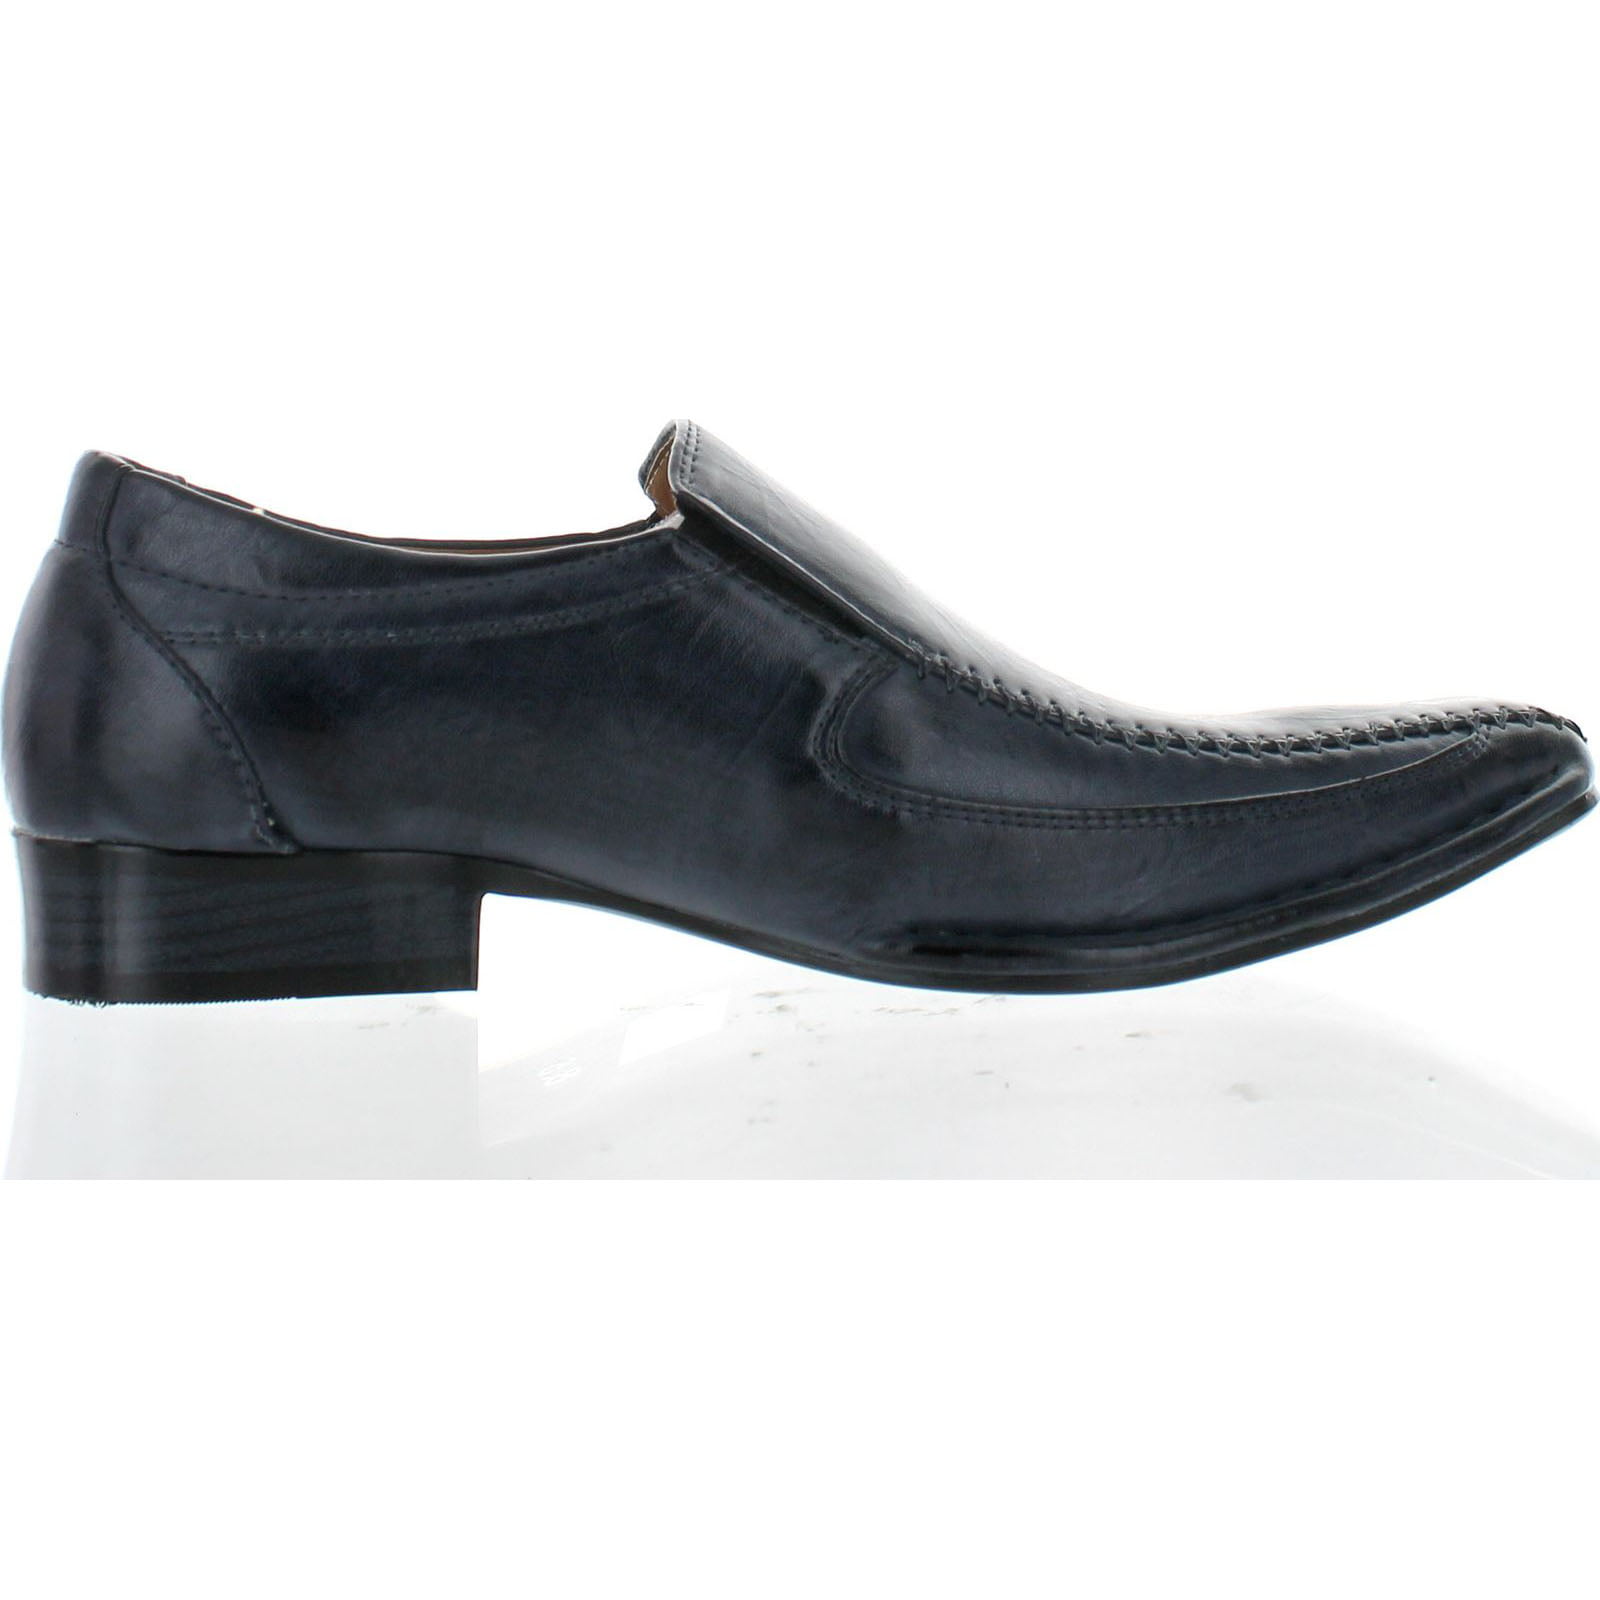 Fiorello HD0112-03 - Mens Iconic Black Navy Italian Design Slip On Smart  Casual Loafers Mocassins Driving Shoes: Buy Online - Happy Gentleman United  States